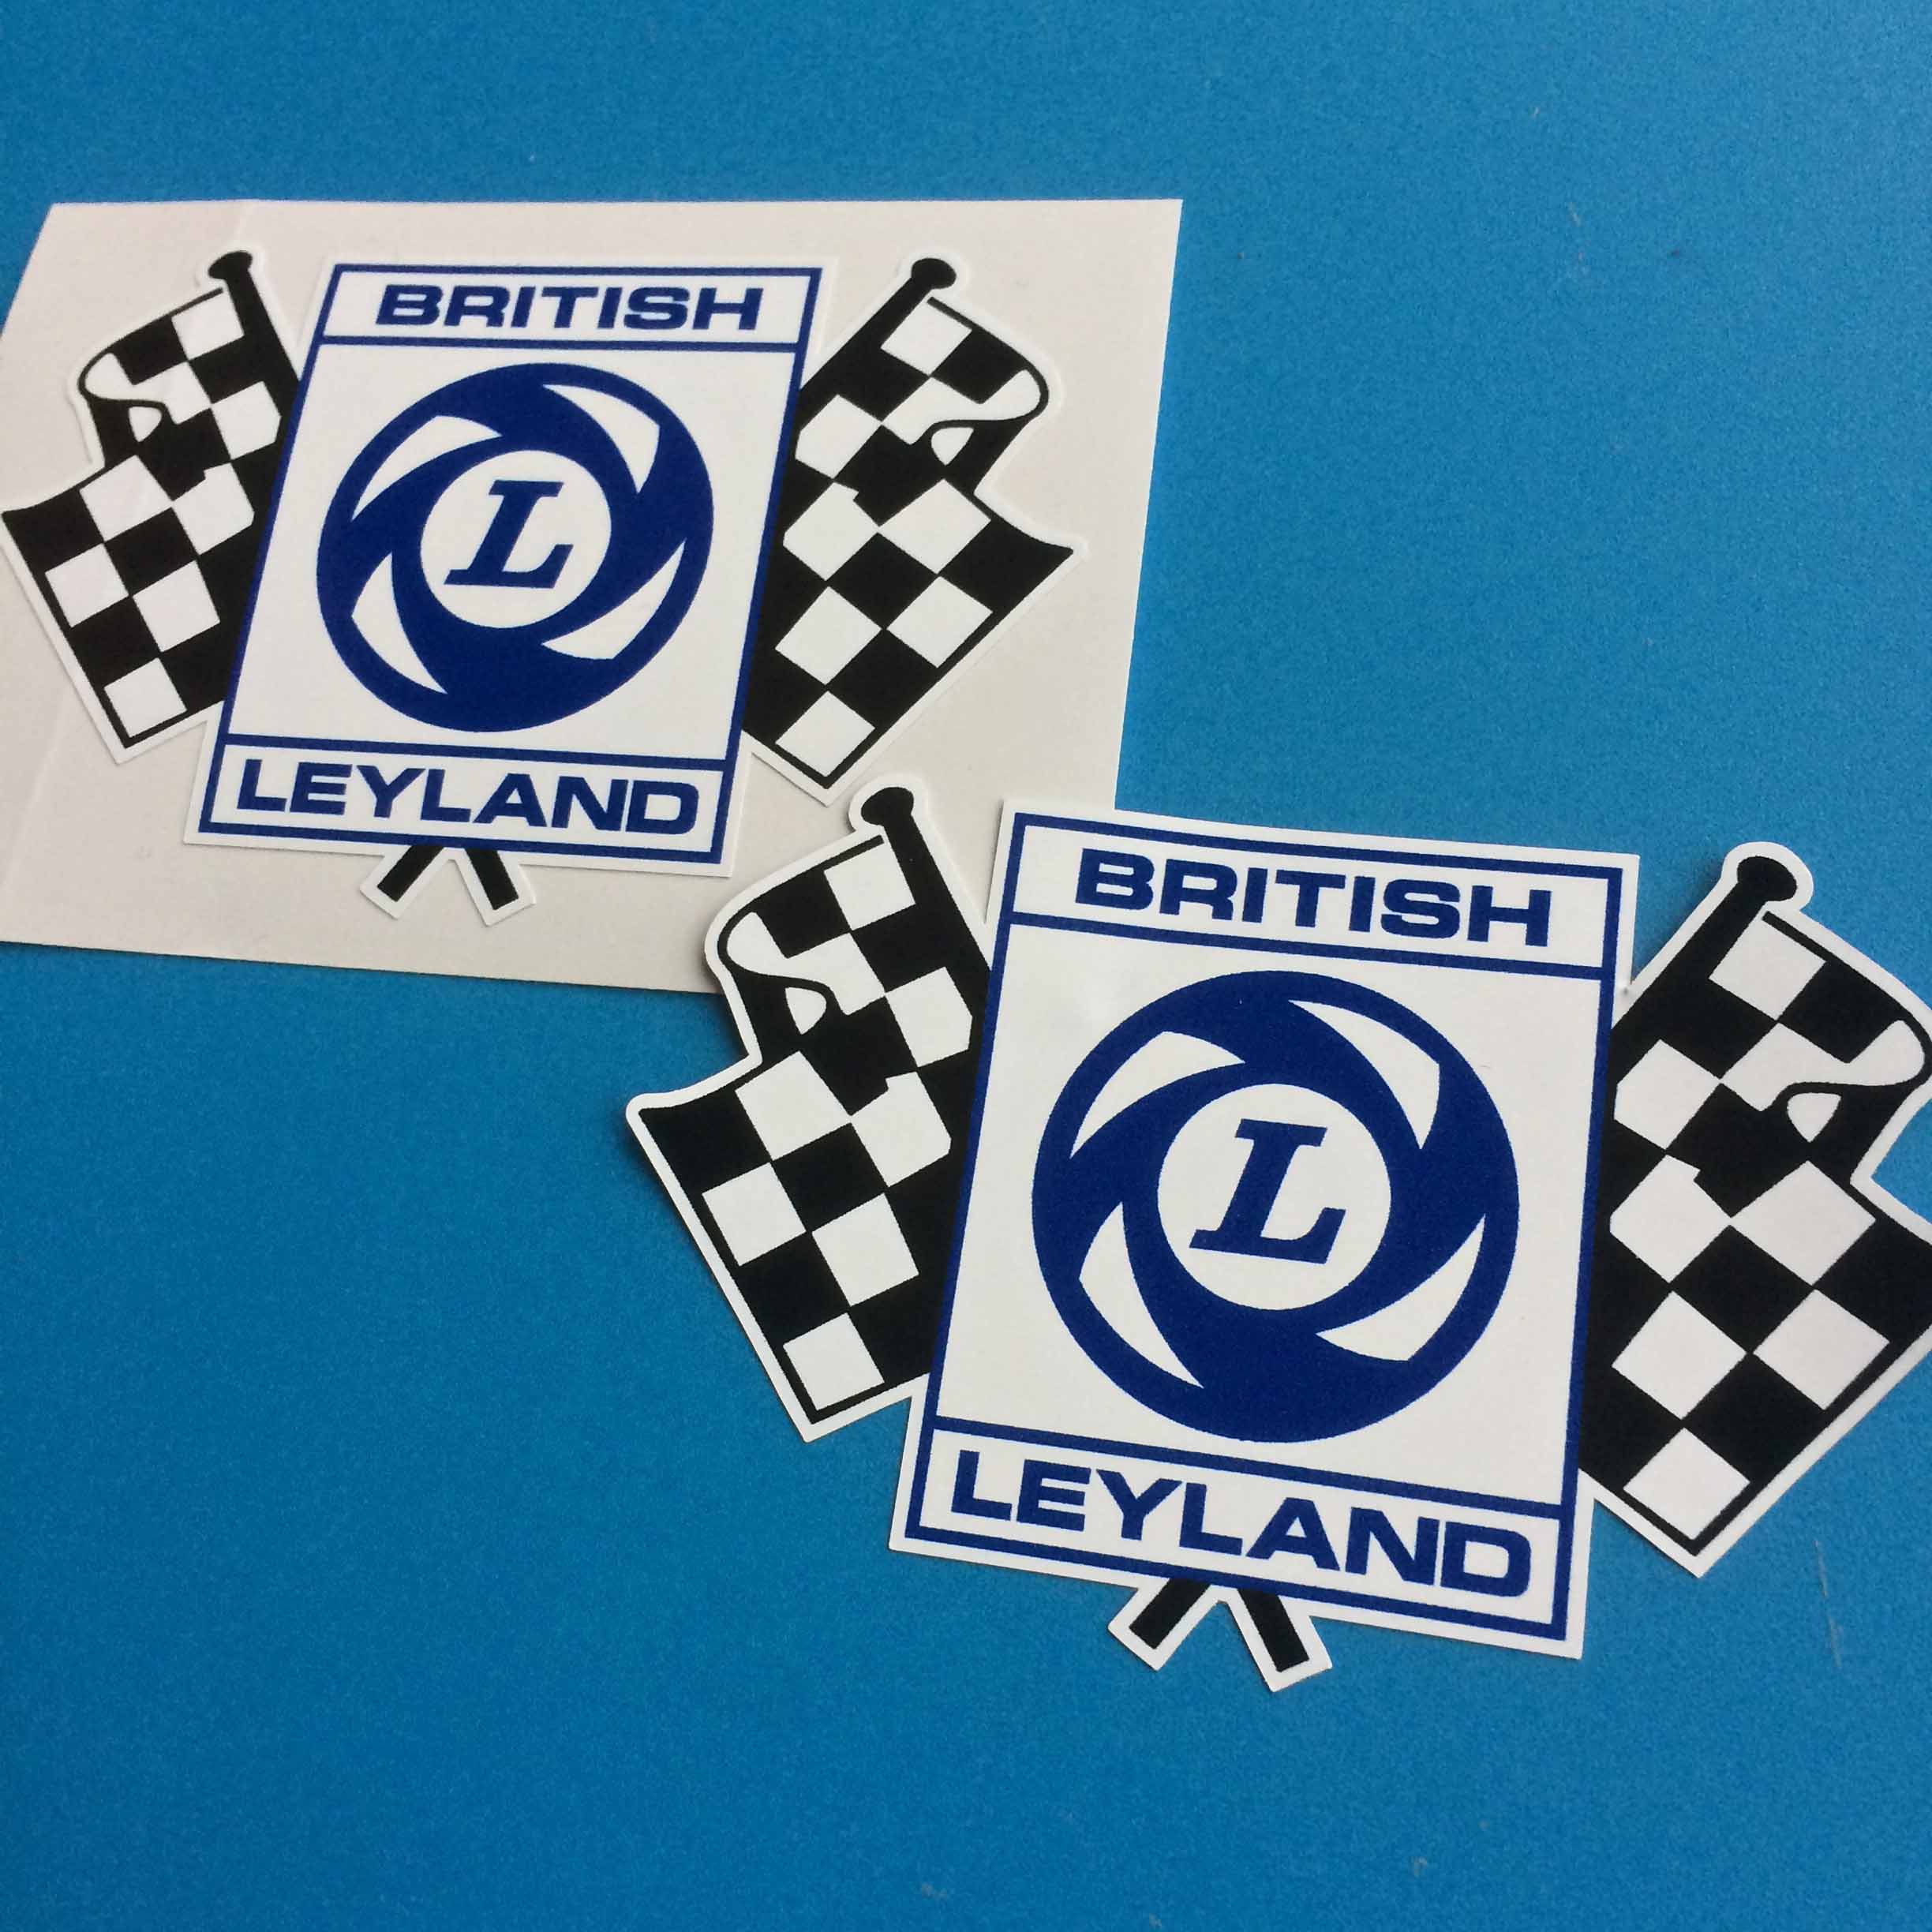 Two black and white chequered crossed flags In front of the flags is the blue and white L logo and the words British Leyland in blue.